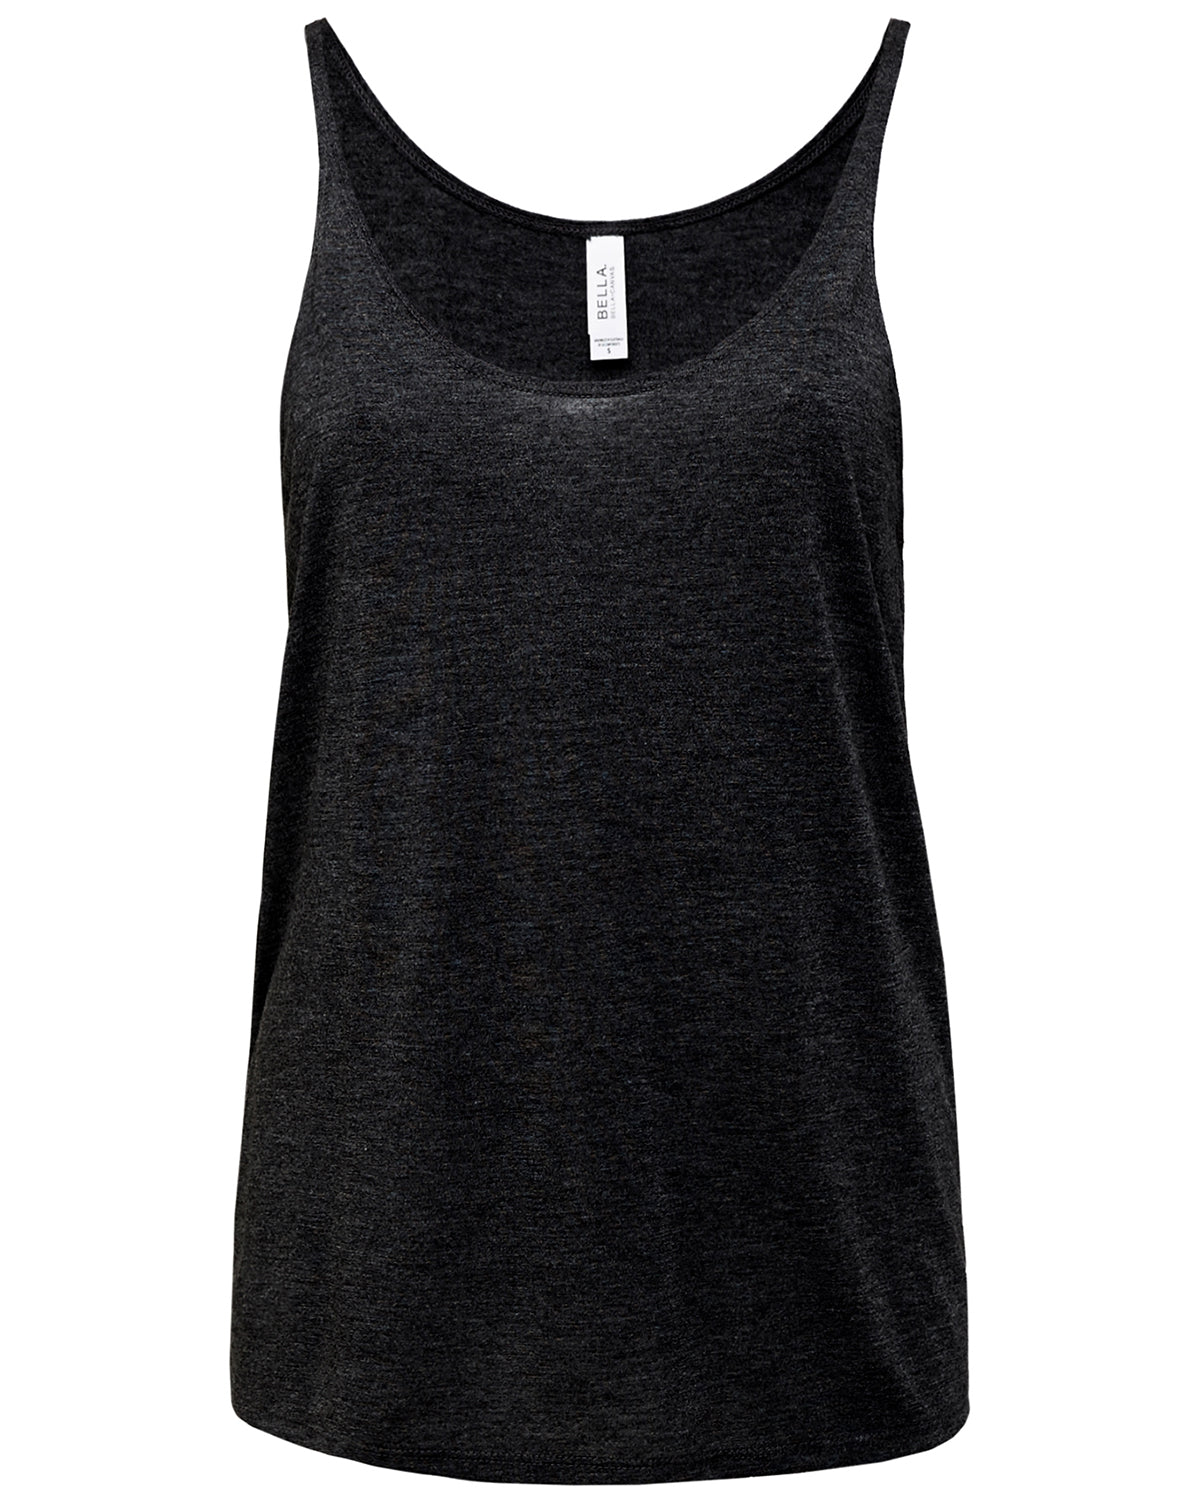 Inspire Tribe Slouchy Tank